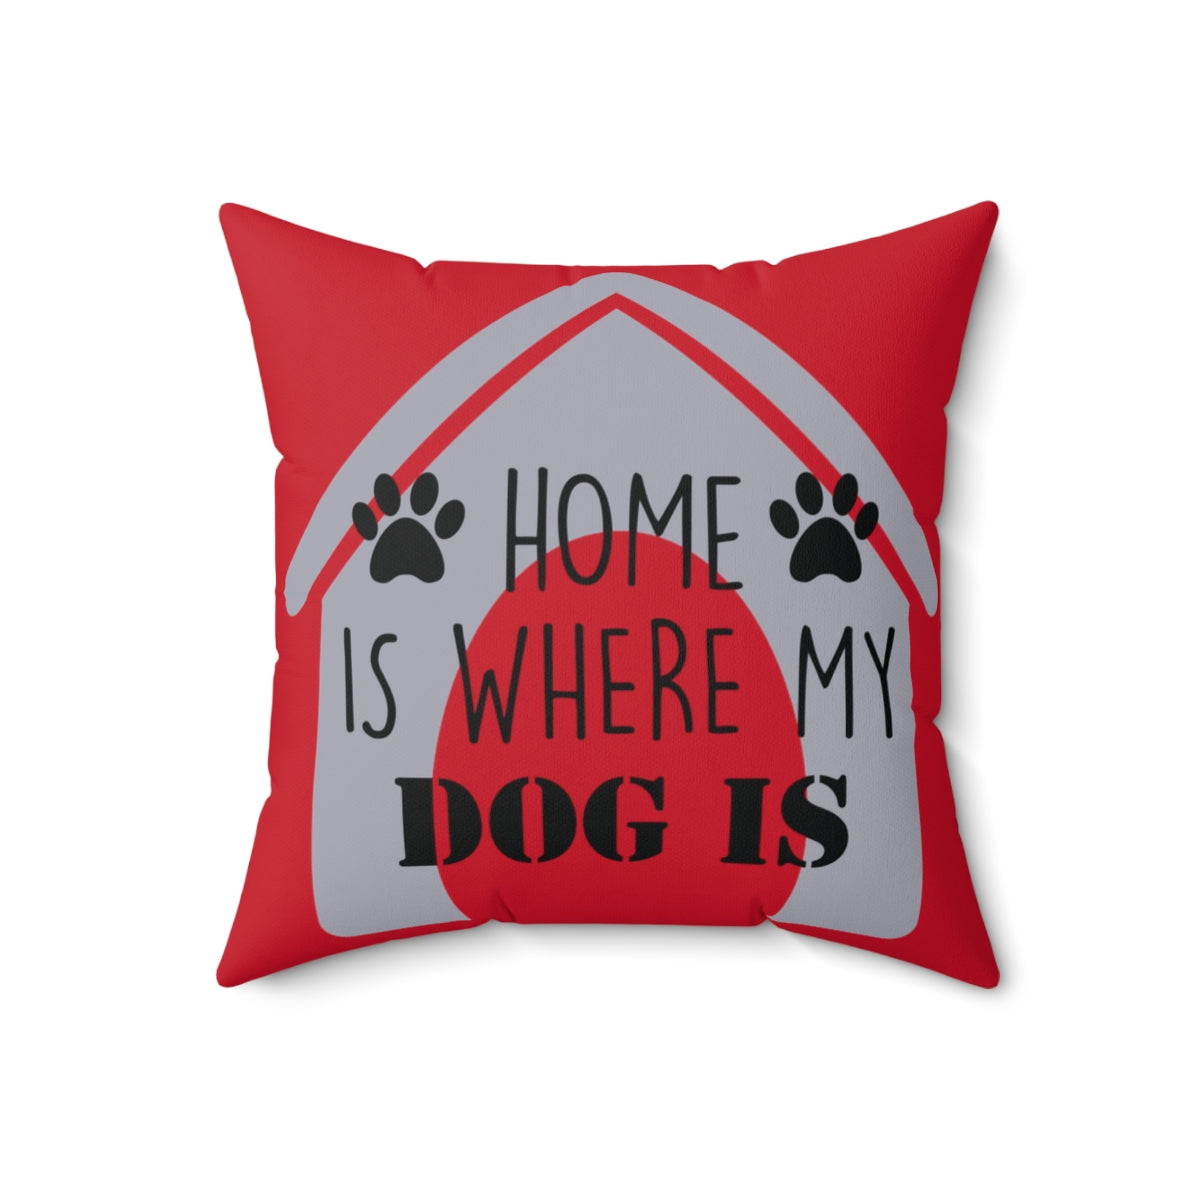 Red Square Pillow Case - Home Is Where My Dog Is - Home Decor Pillow Cover - Accent Pillow Cover